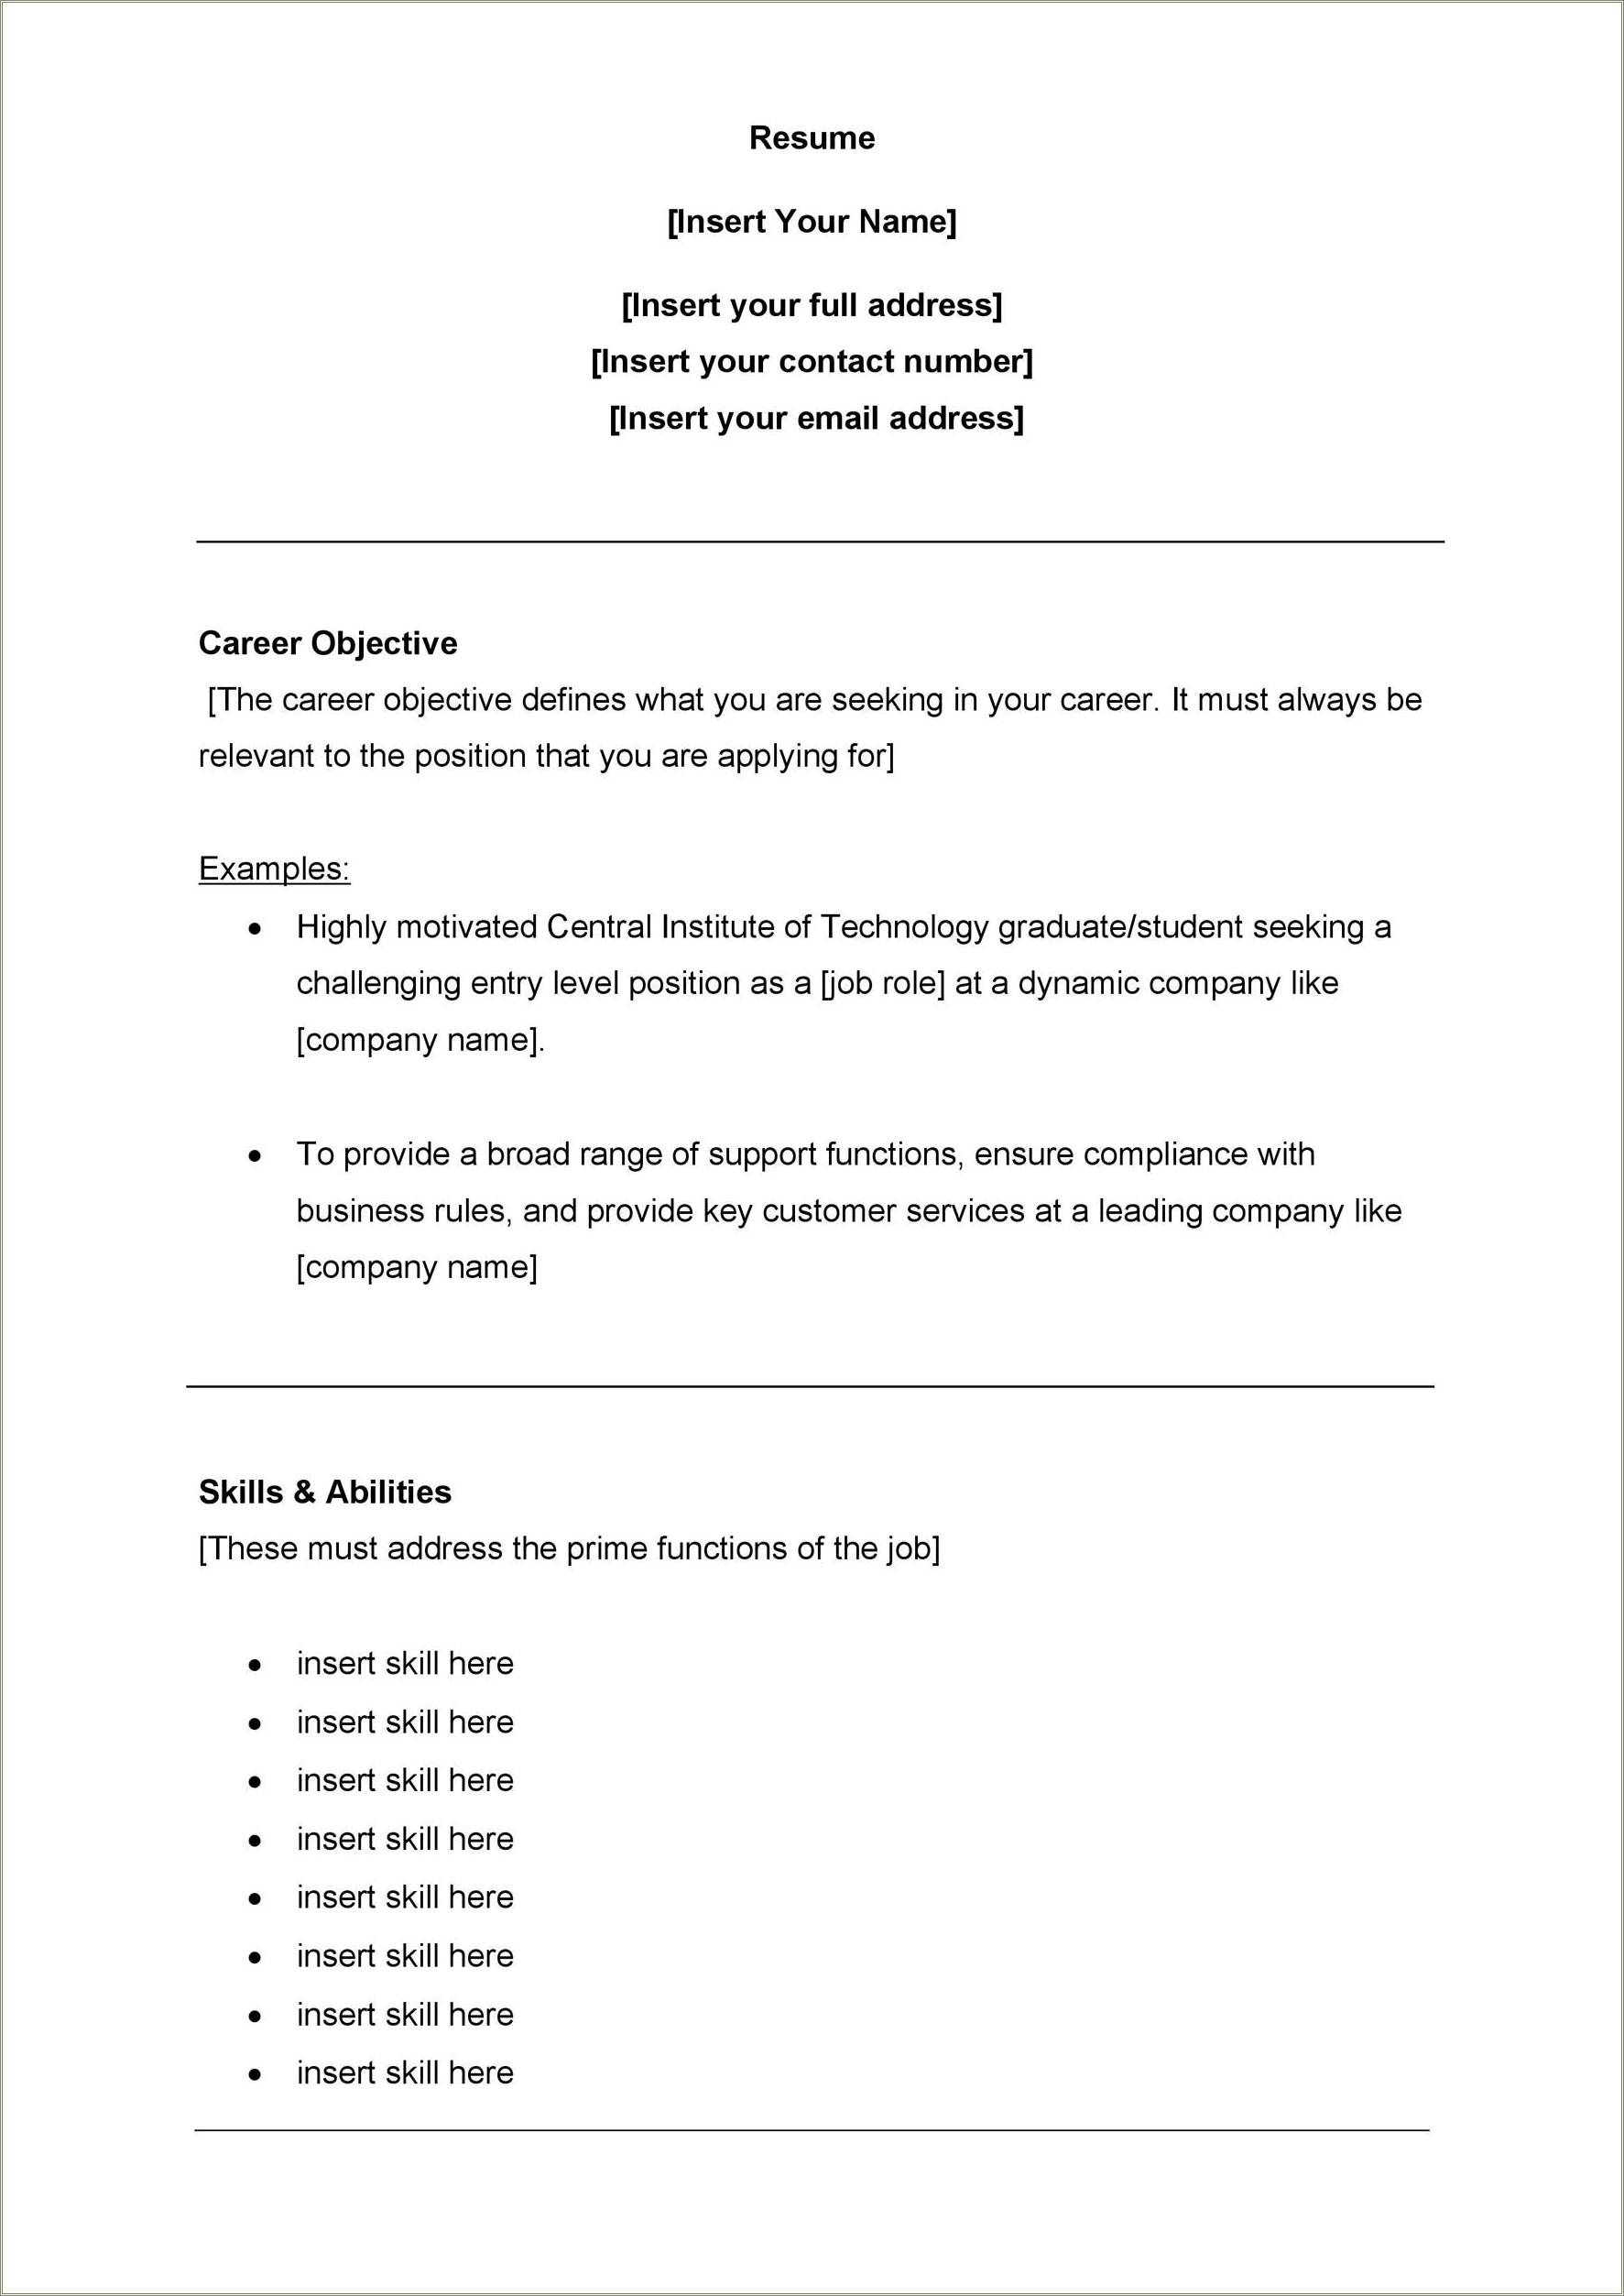 Where To Insert An Objective On Resume